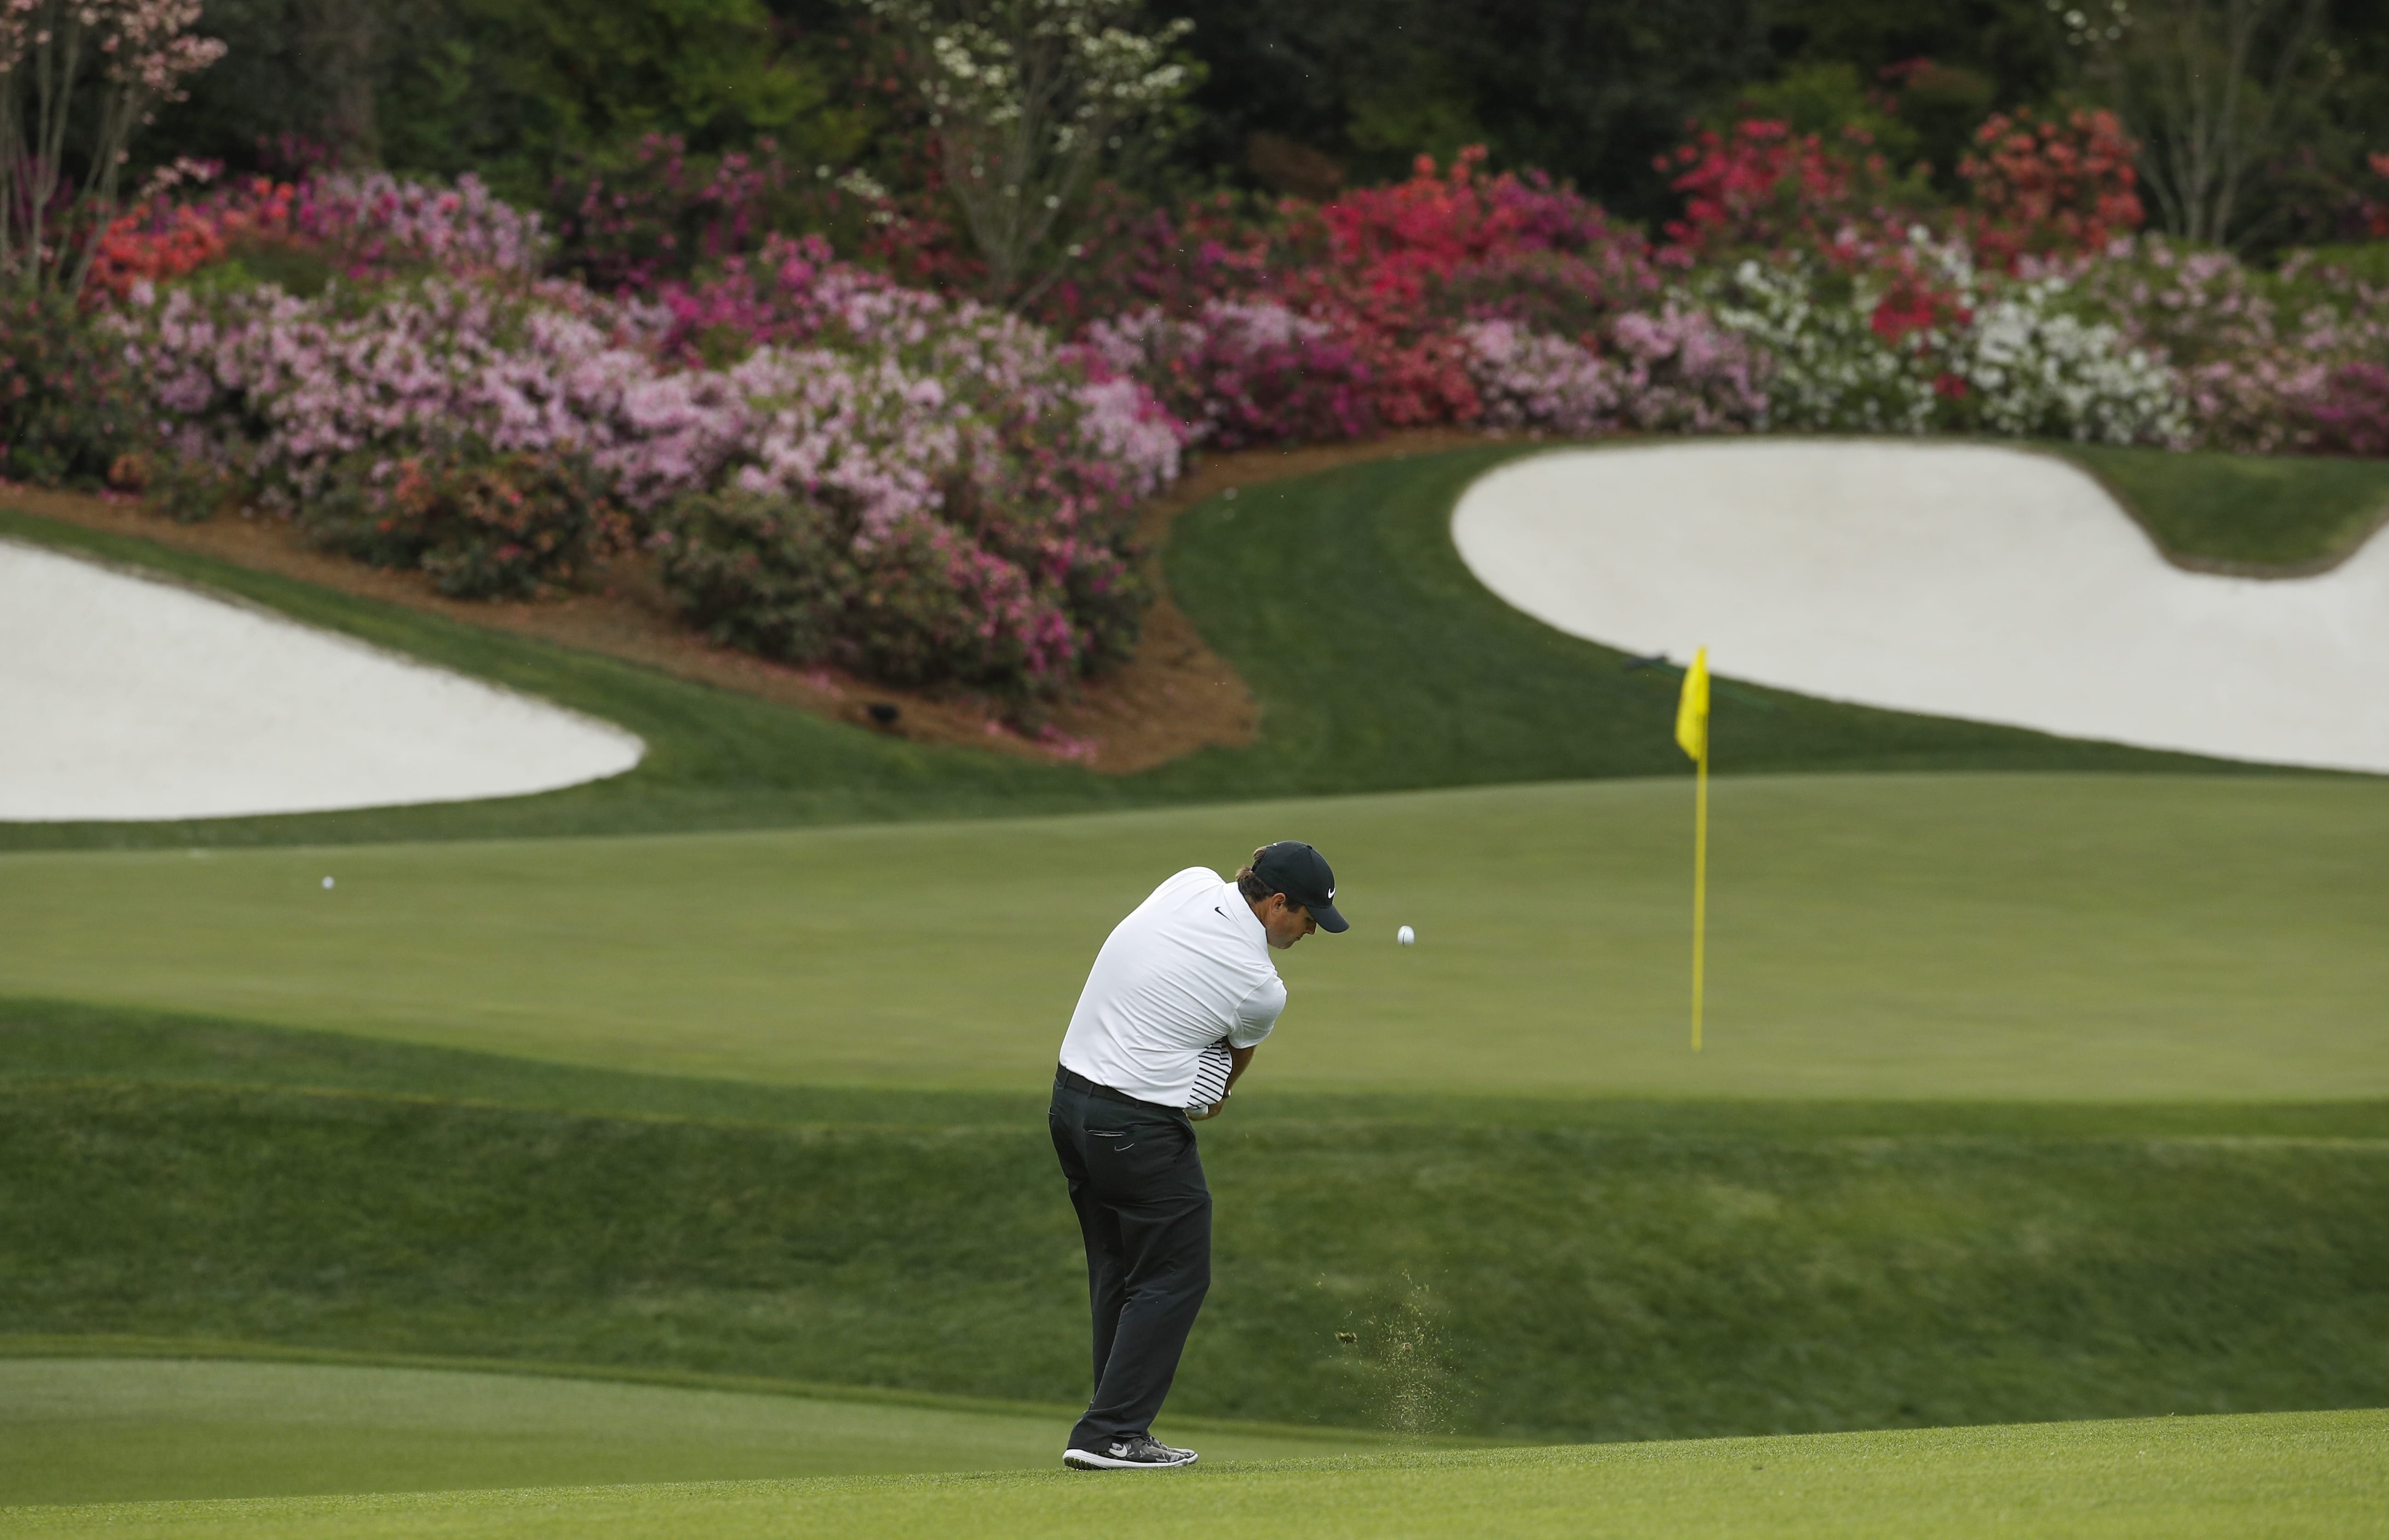 Patrick Reed hits to the 13th green during the second round at the Masters golf tournament Friday, April 6, 2018, in Augusta, Ga.